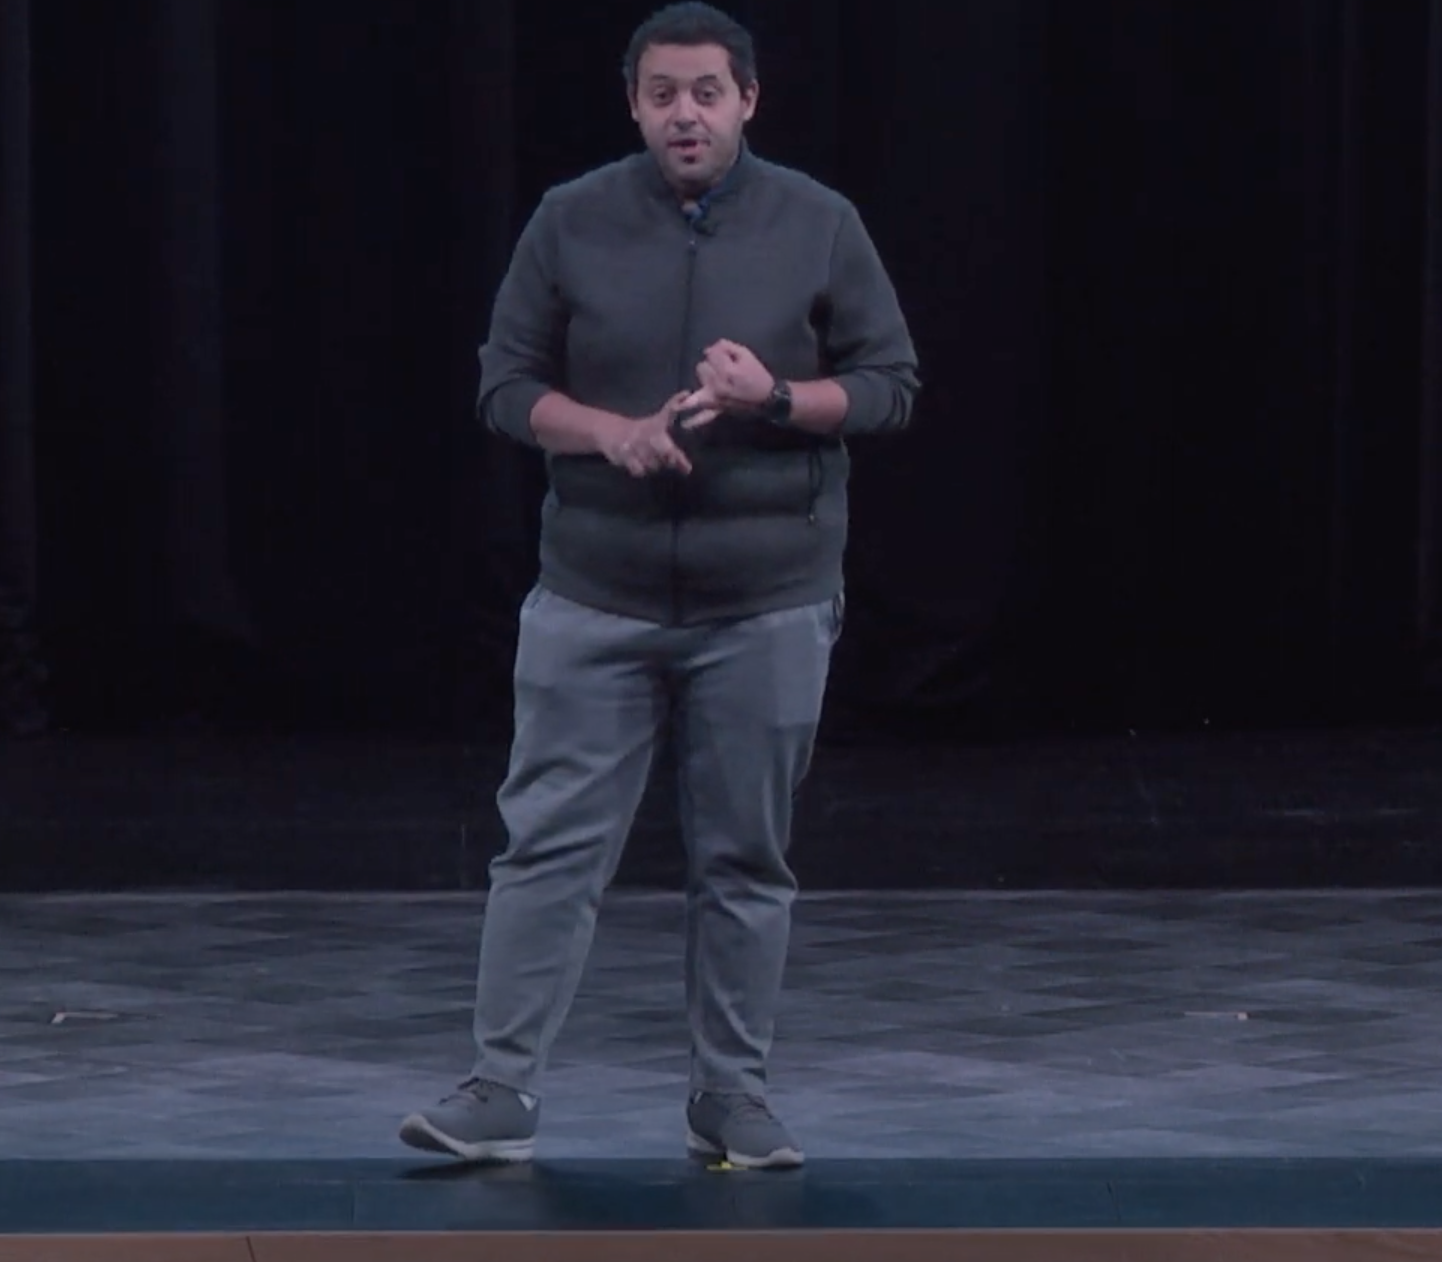 This photo shows the full body of a man on a stage speaking animatedly. He is wearing blue-gray pants, a gray sweater, and gray shoes. He has medium skin tone and dark short hair. 